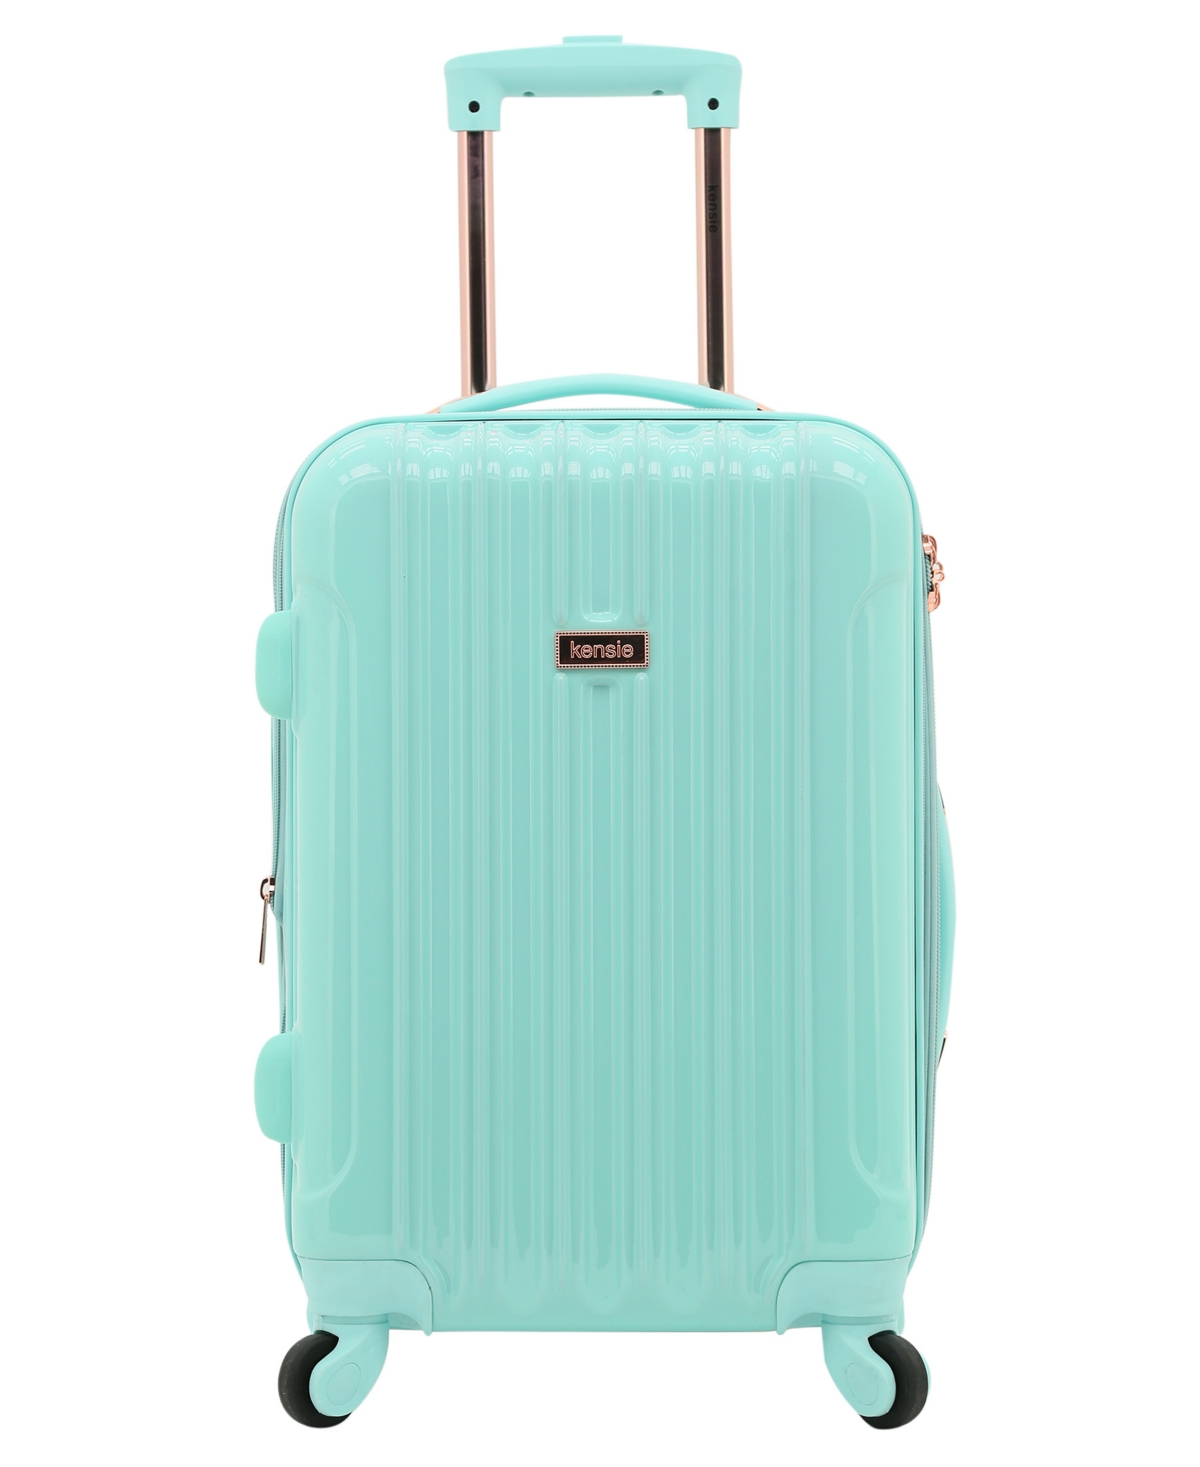 20" Expandable Rolling Carry-On Luggage - Opal